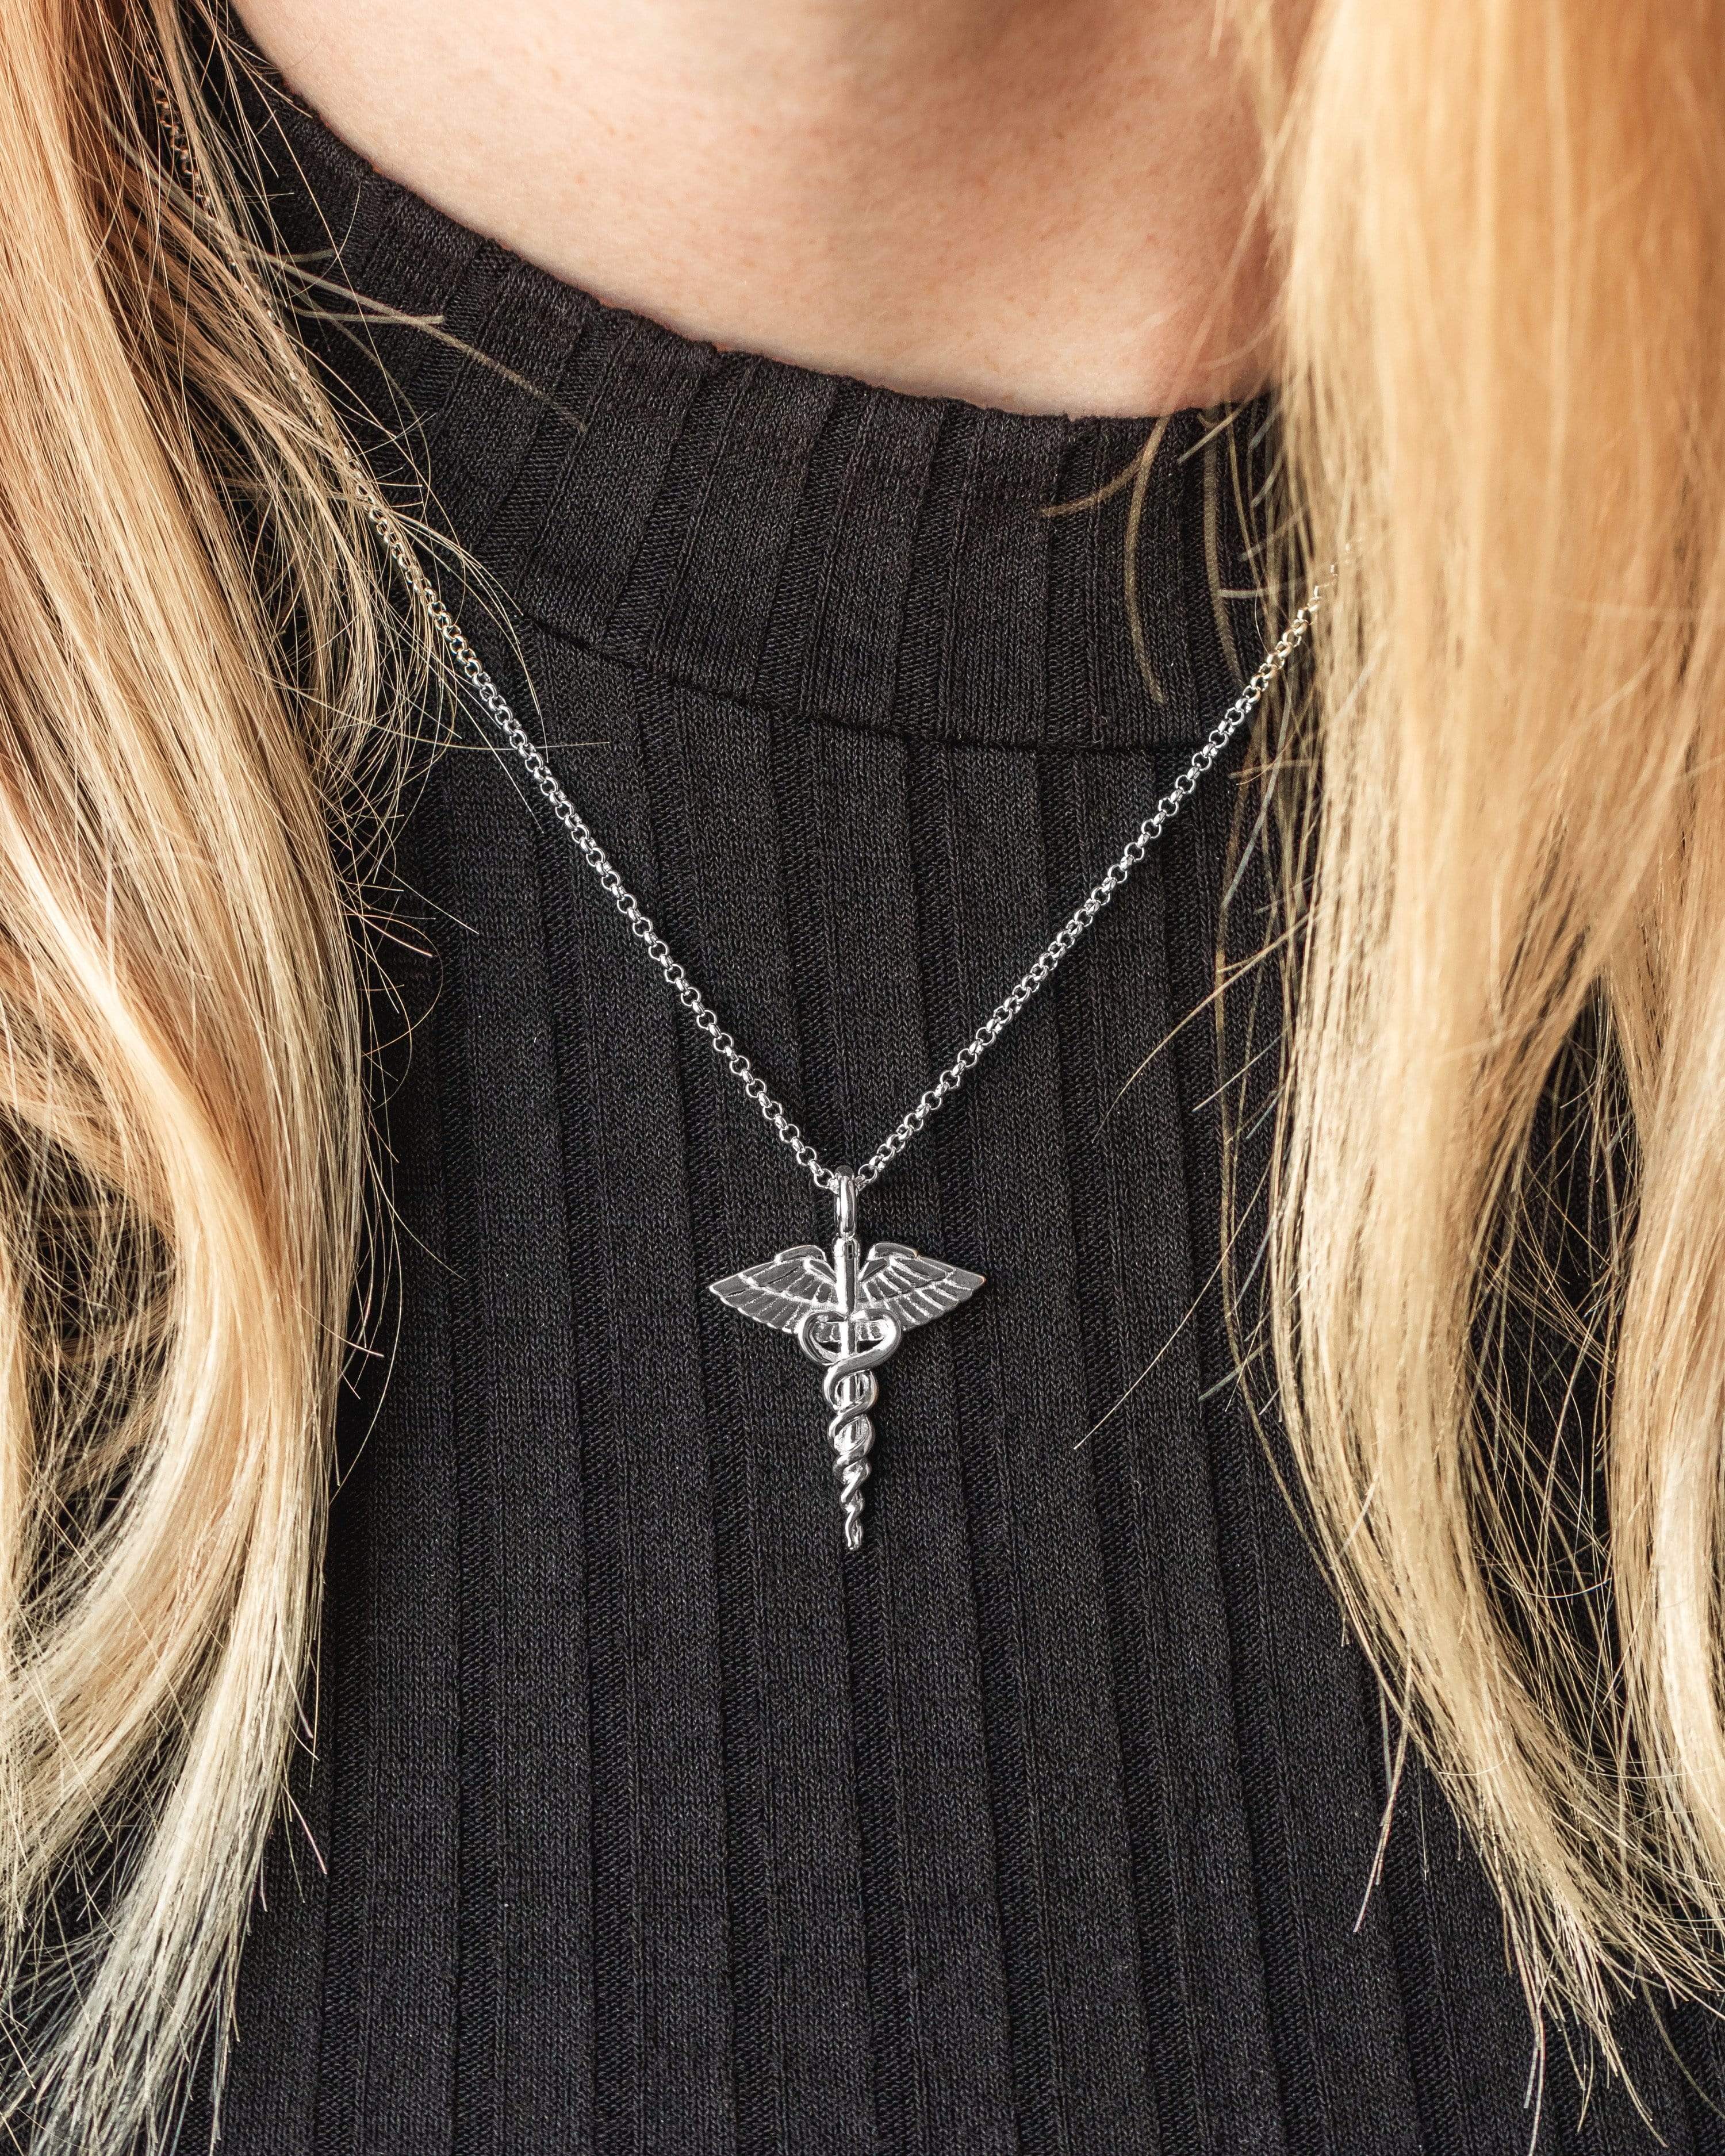 caduceus necklaces science jewelry sterling silver sciencejewelry1824 29506929885361